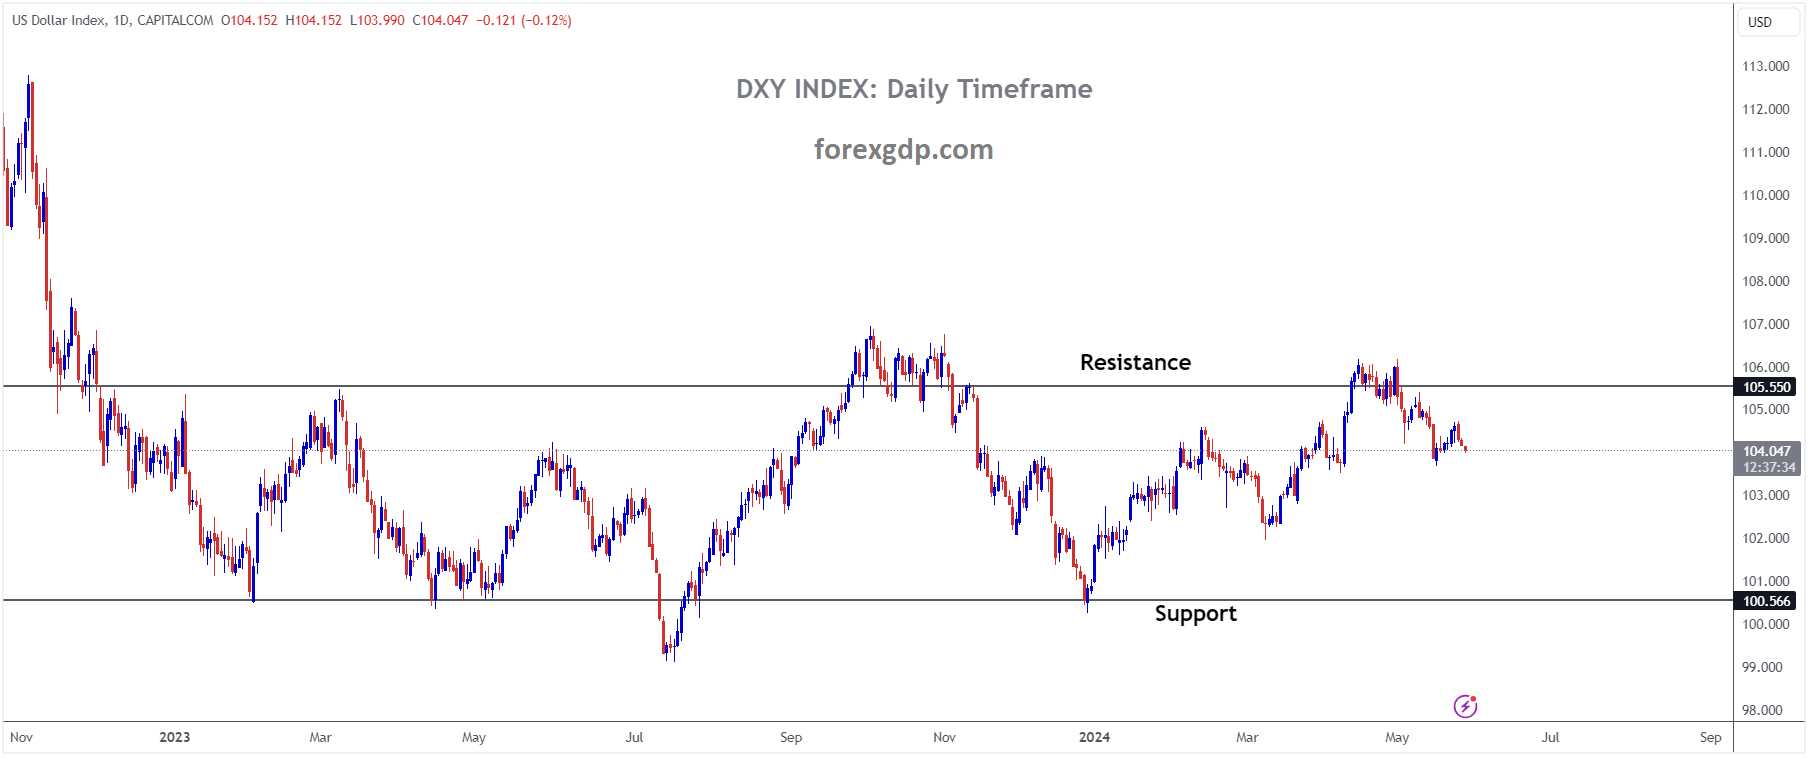 USD INDEX is moving in the Box pattern and the market has fallen from the resistance area of the pattern